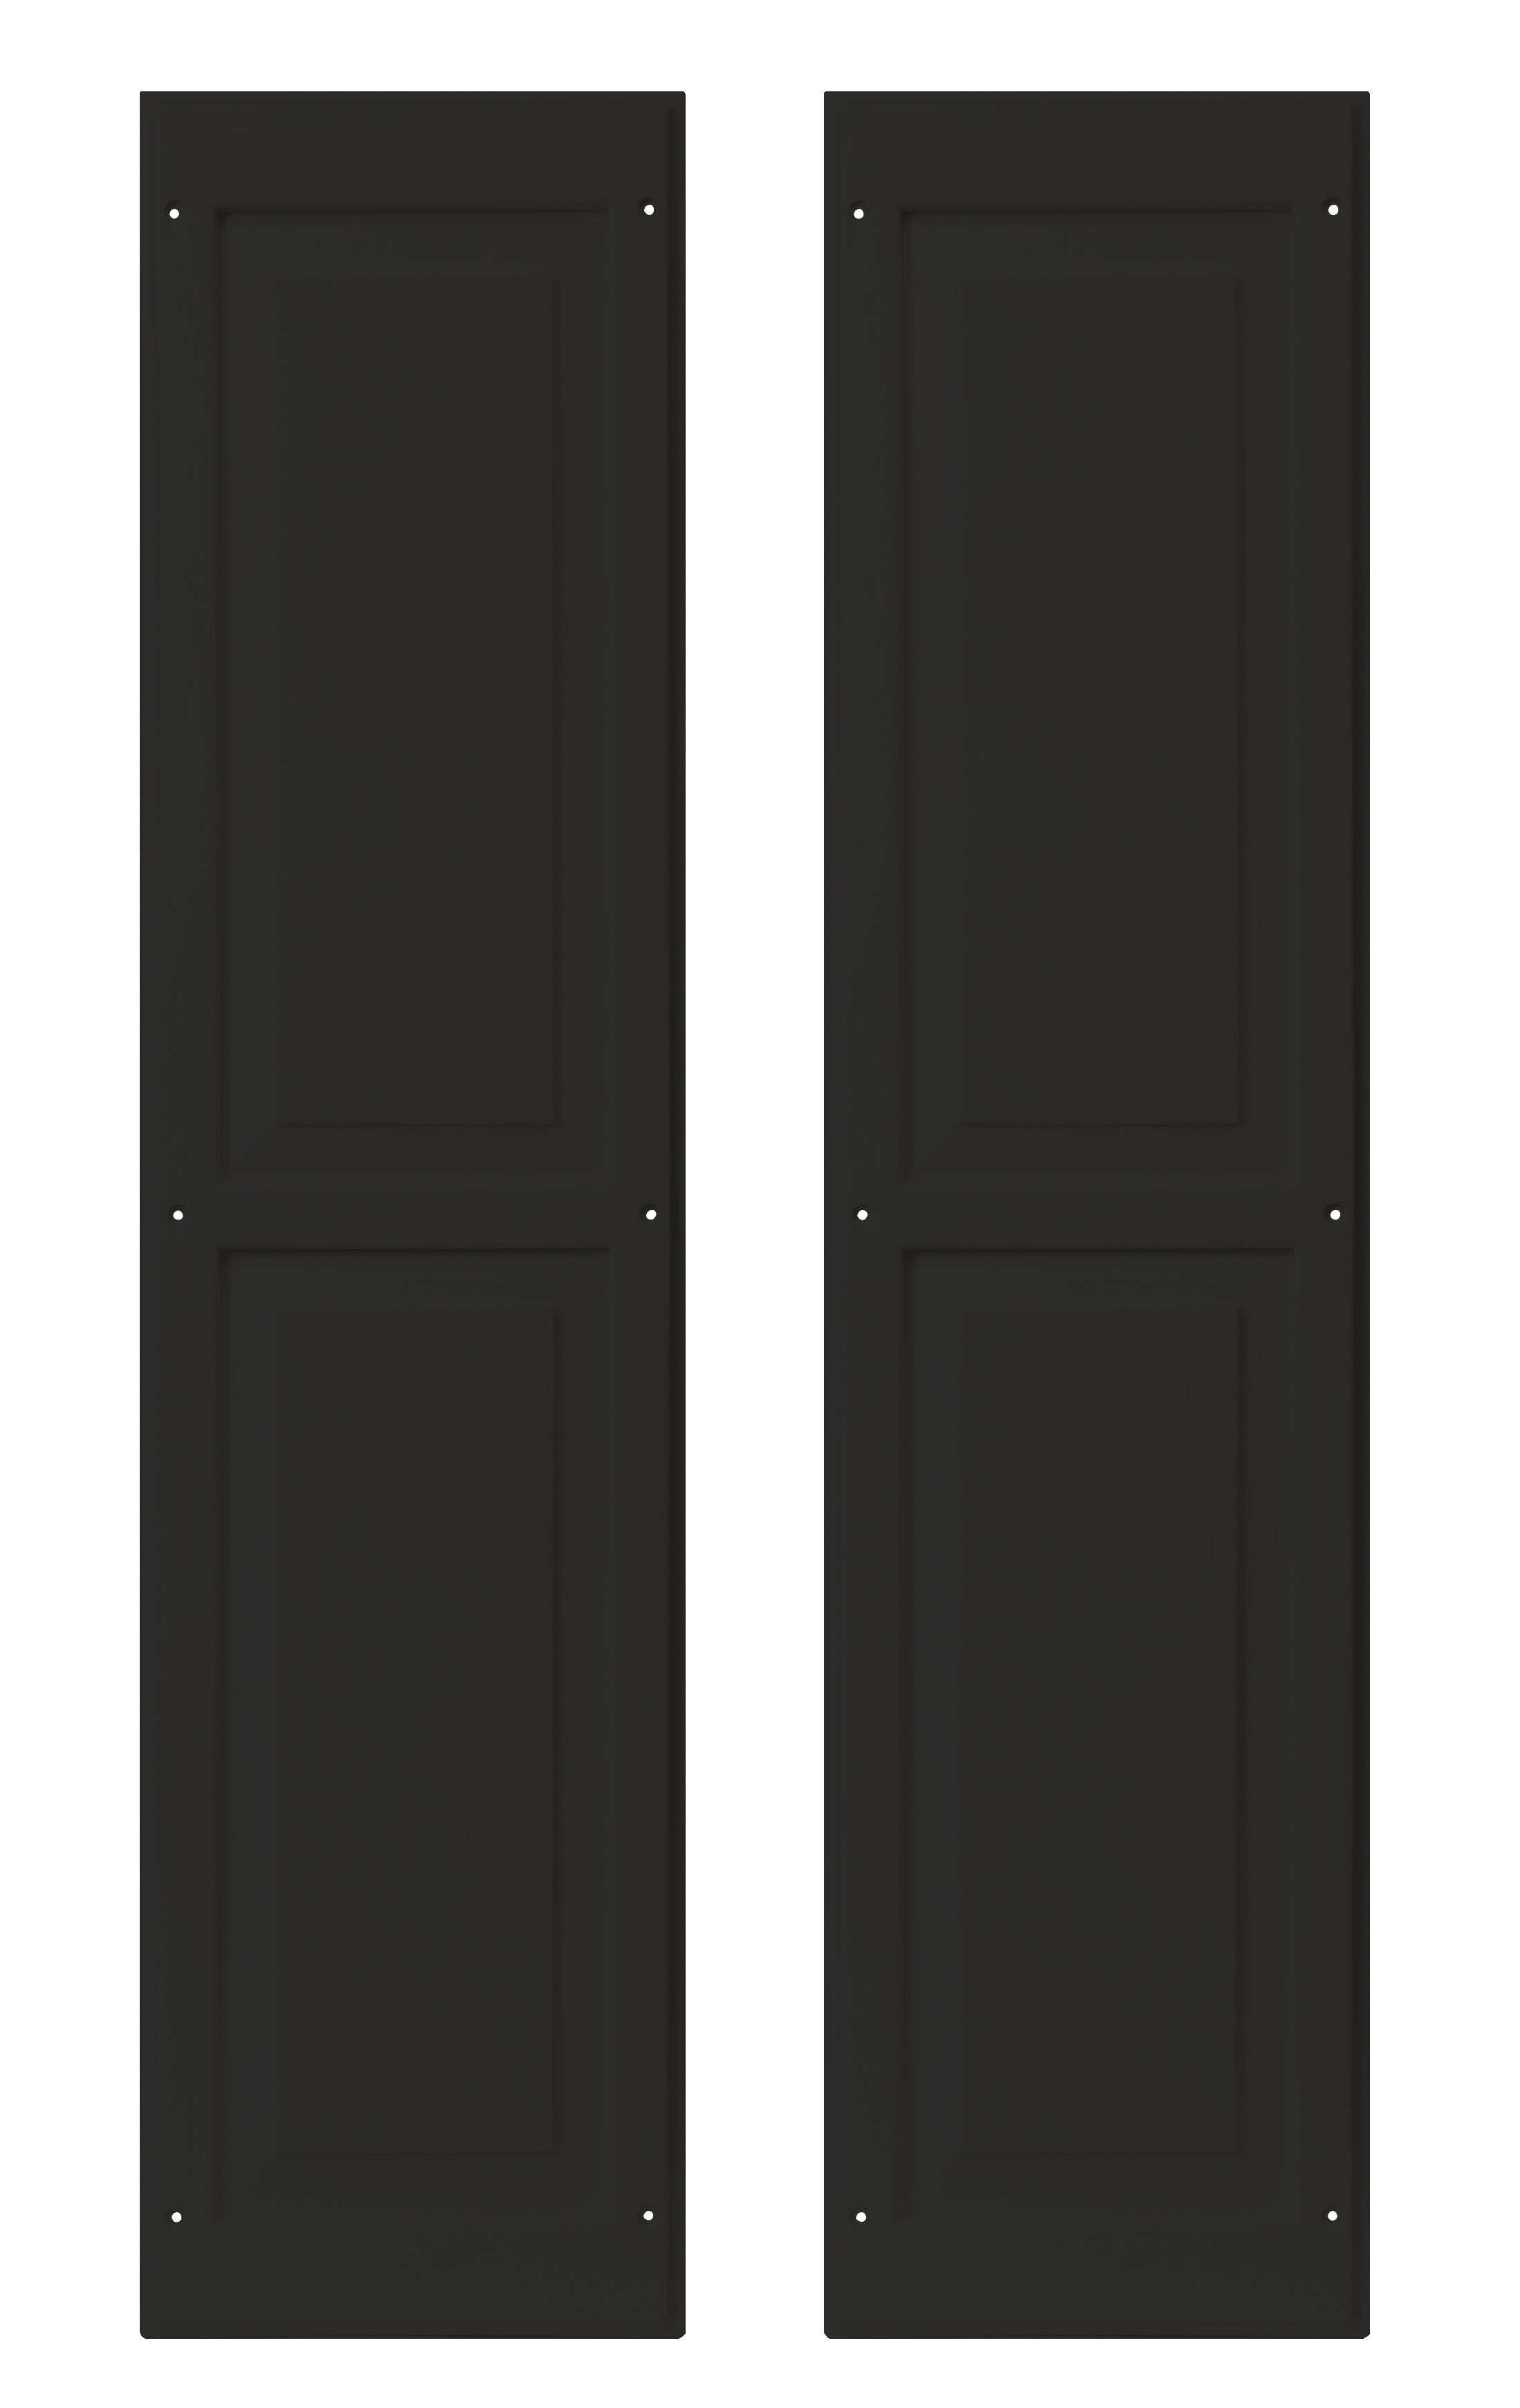 Pair of 9" W x 36" H Raised Panel Black Shutters for Sheds, Playhouses, and MORE